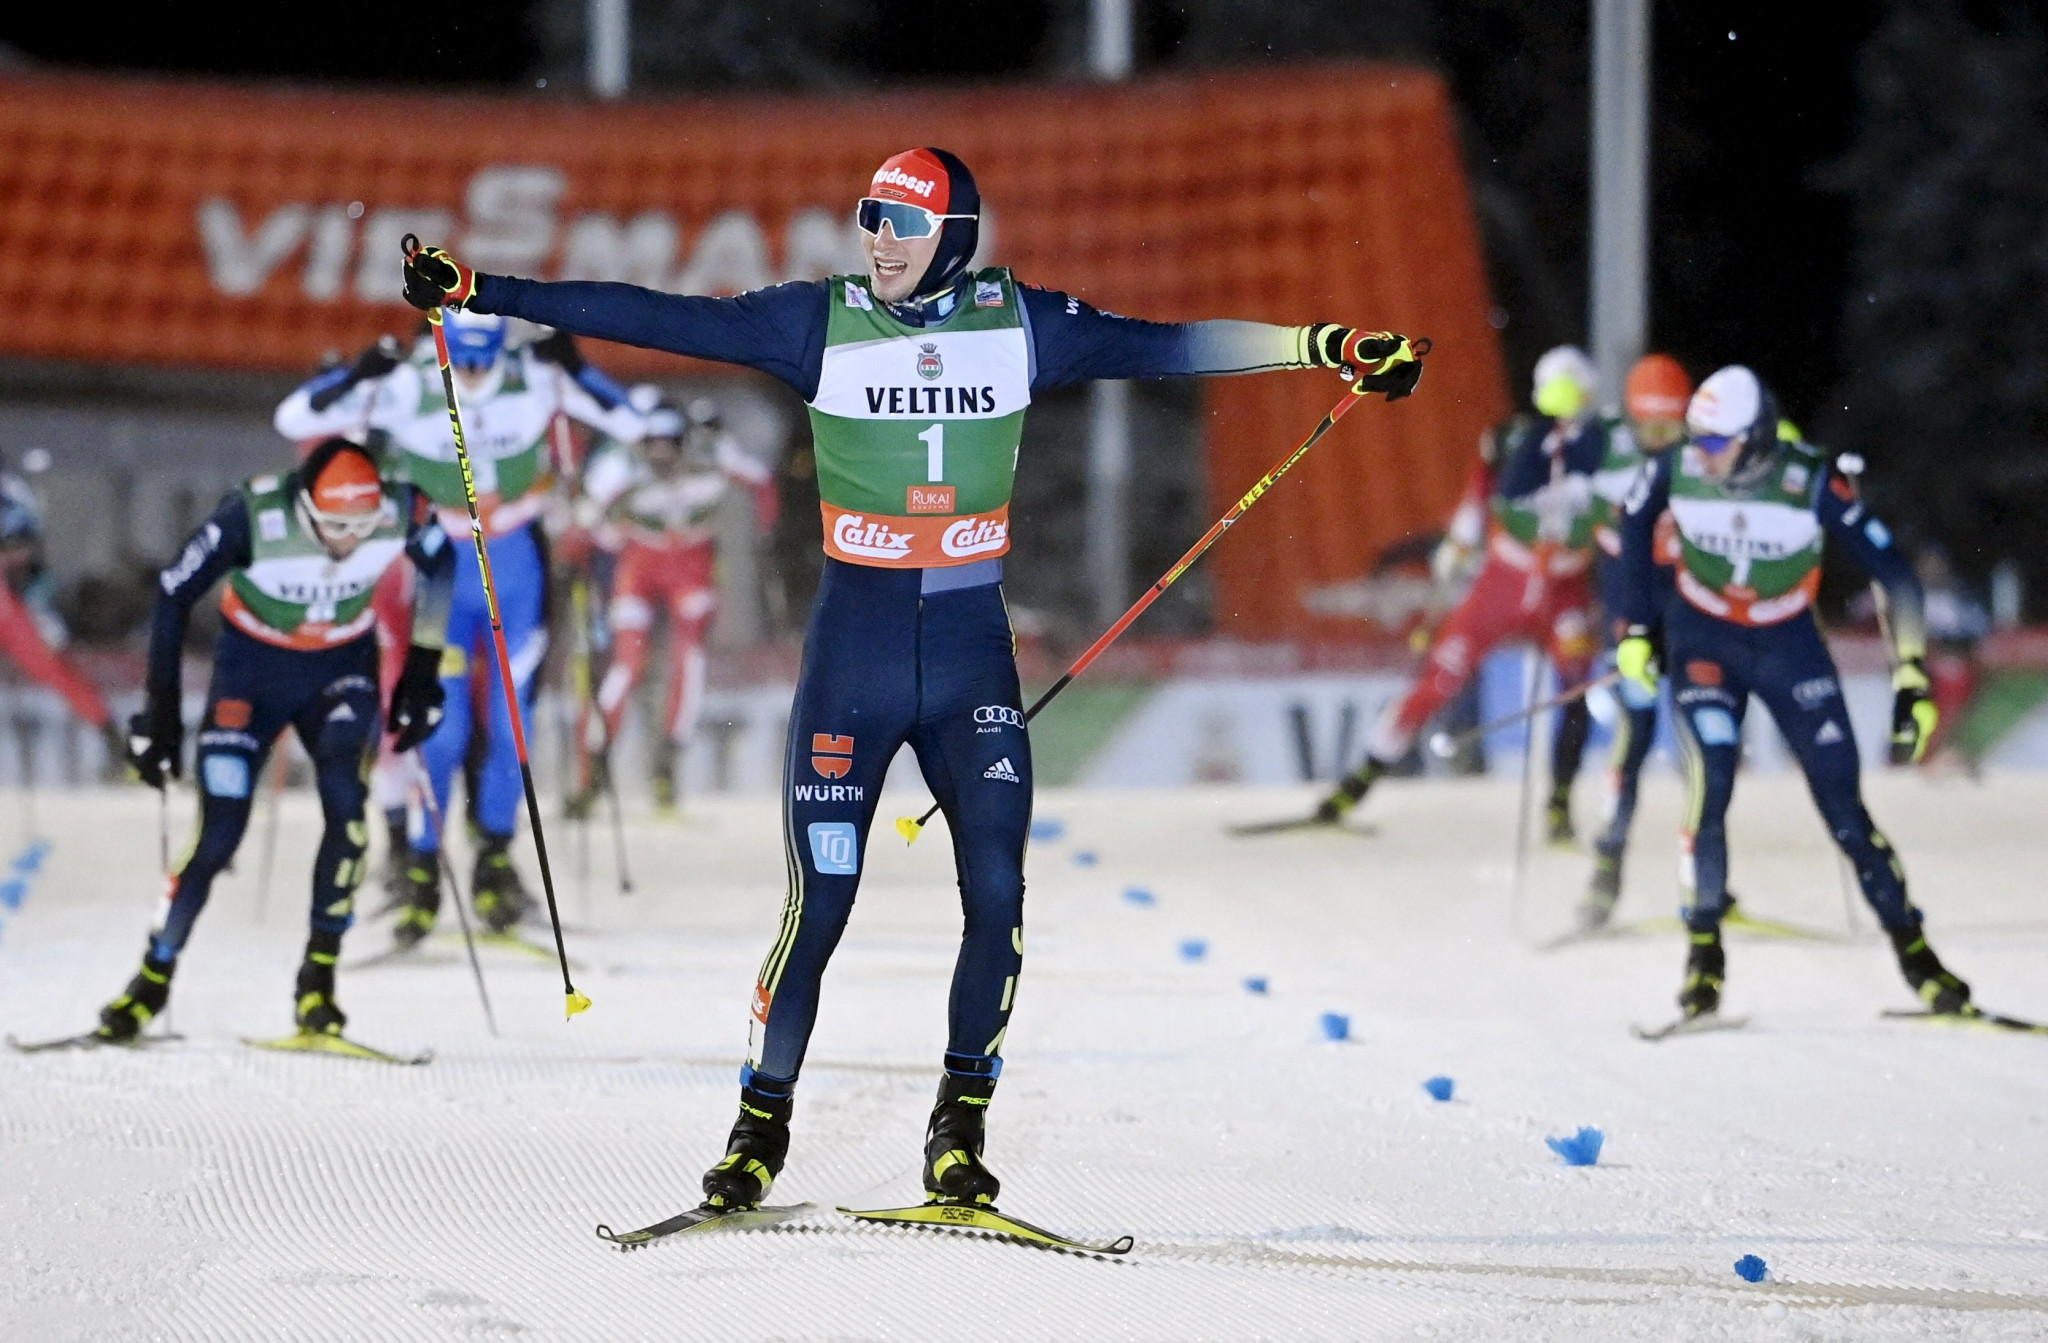 German clean sweep as Riiber disqualified at Ruka Nordic Combined World Cup